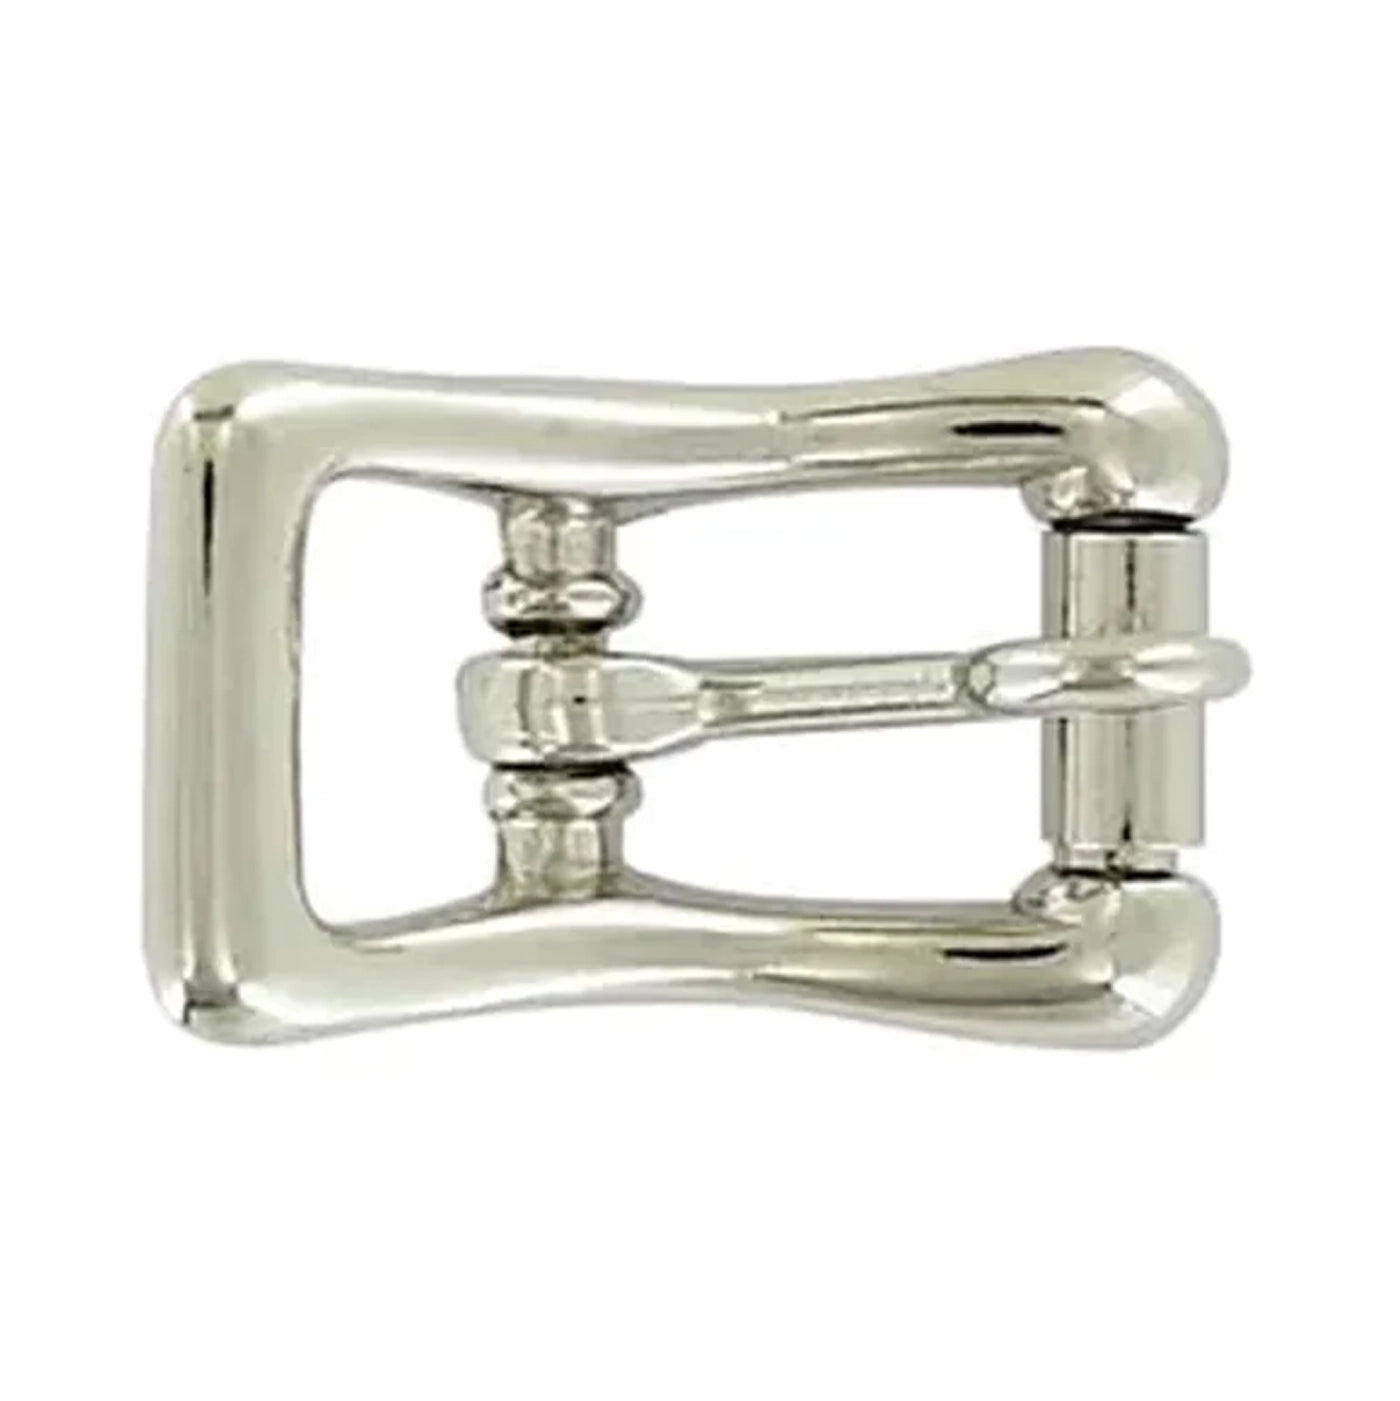 Roller buckle with Locking Tongue 20 - 26 mm, Nickel Plated